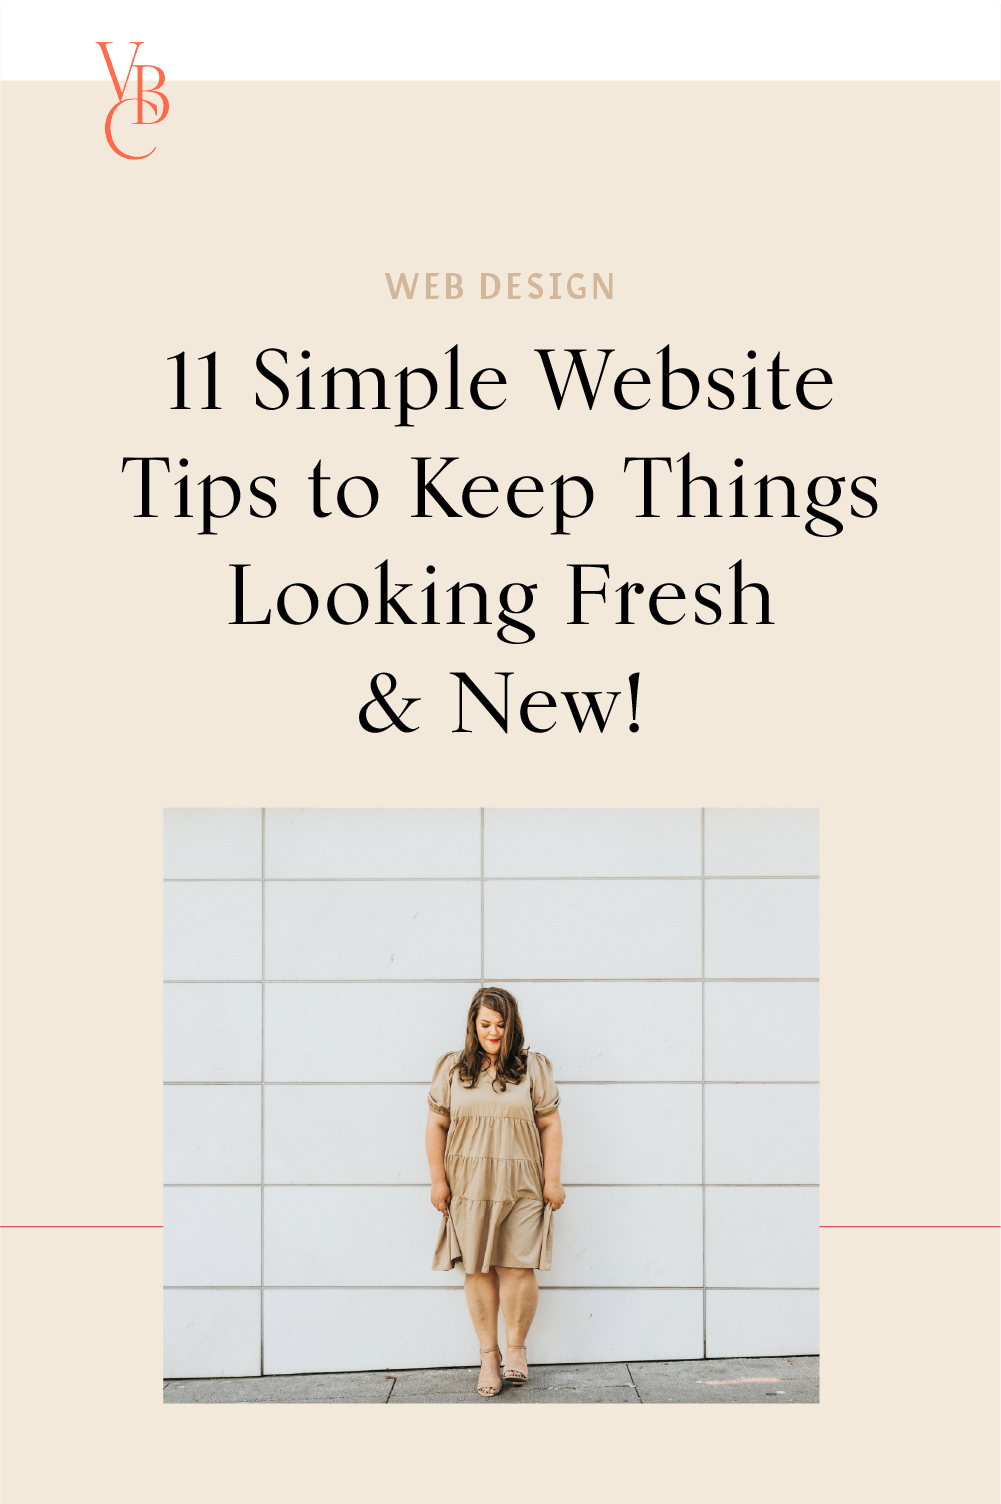 Web designer Vanessa Bucceri sharing her simple tips to keep a site looking fresh and new